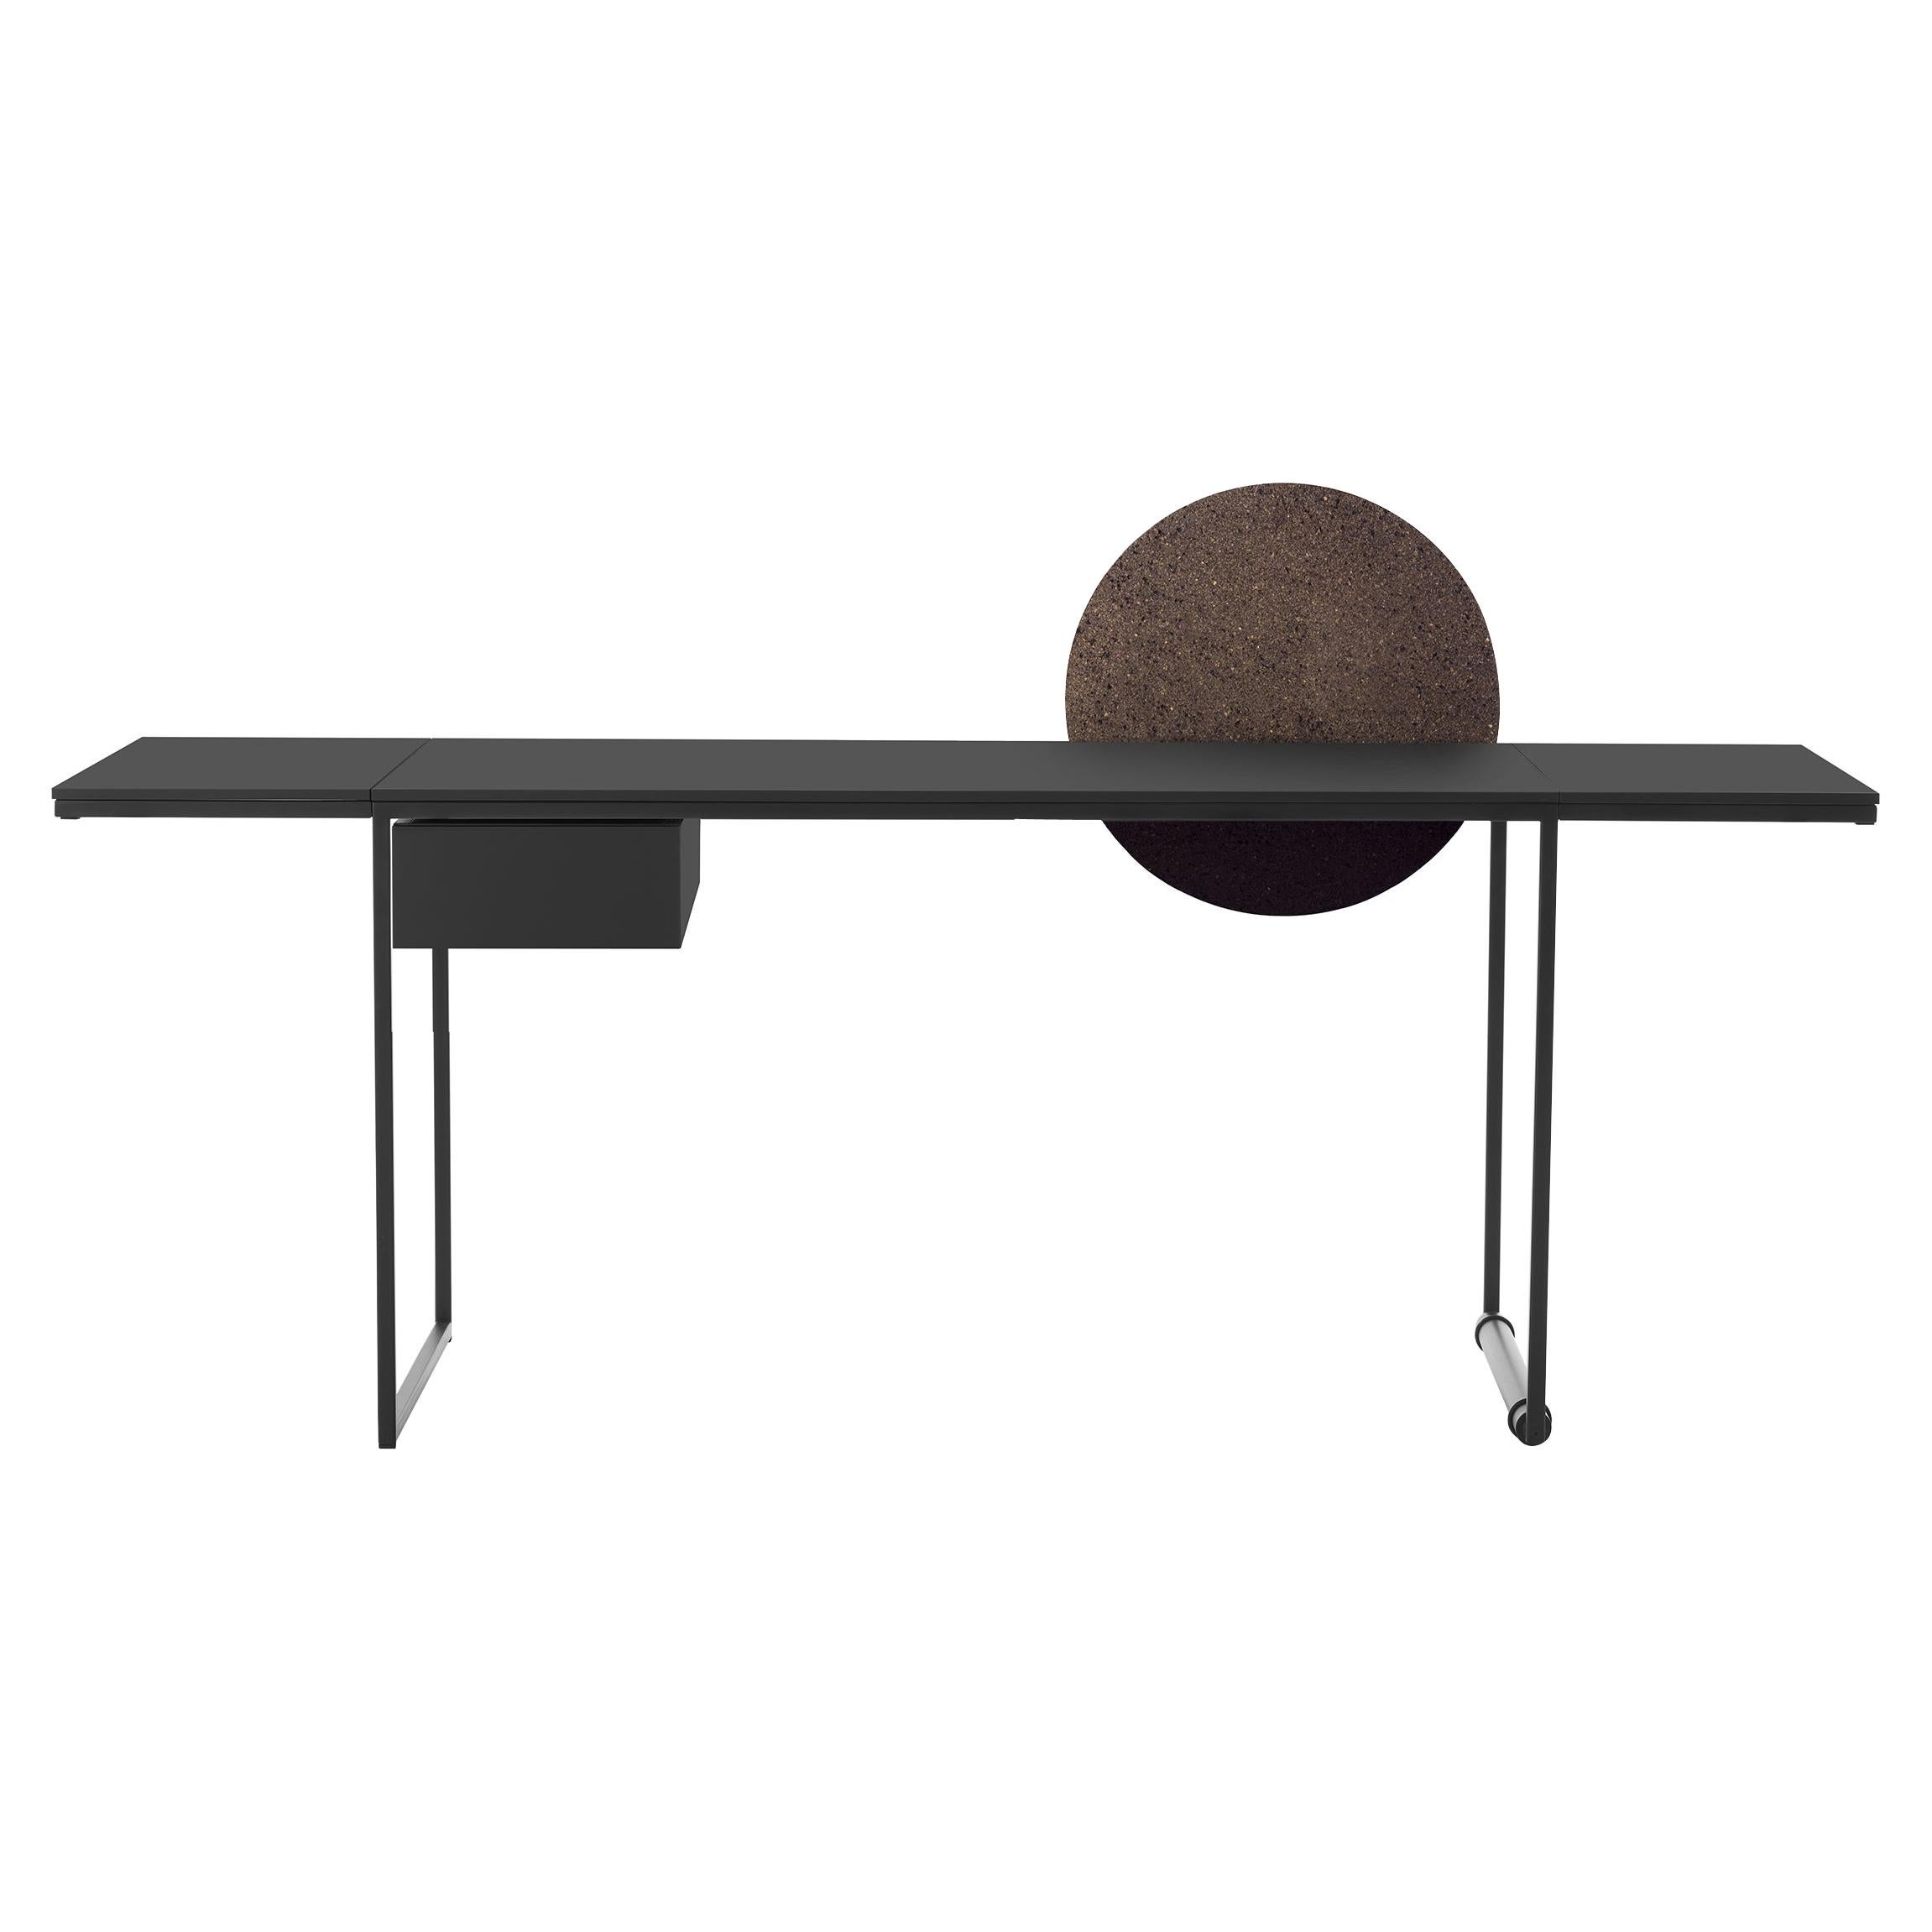 XXX Extendible Coffee Table in Matte Black with Cork Panel and Drawer by Lapo